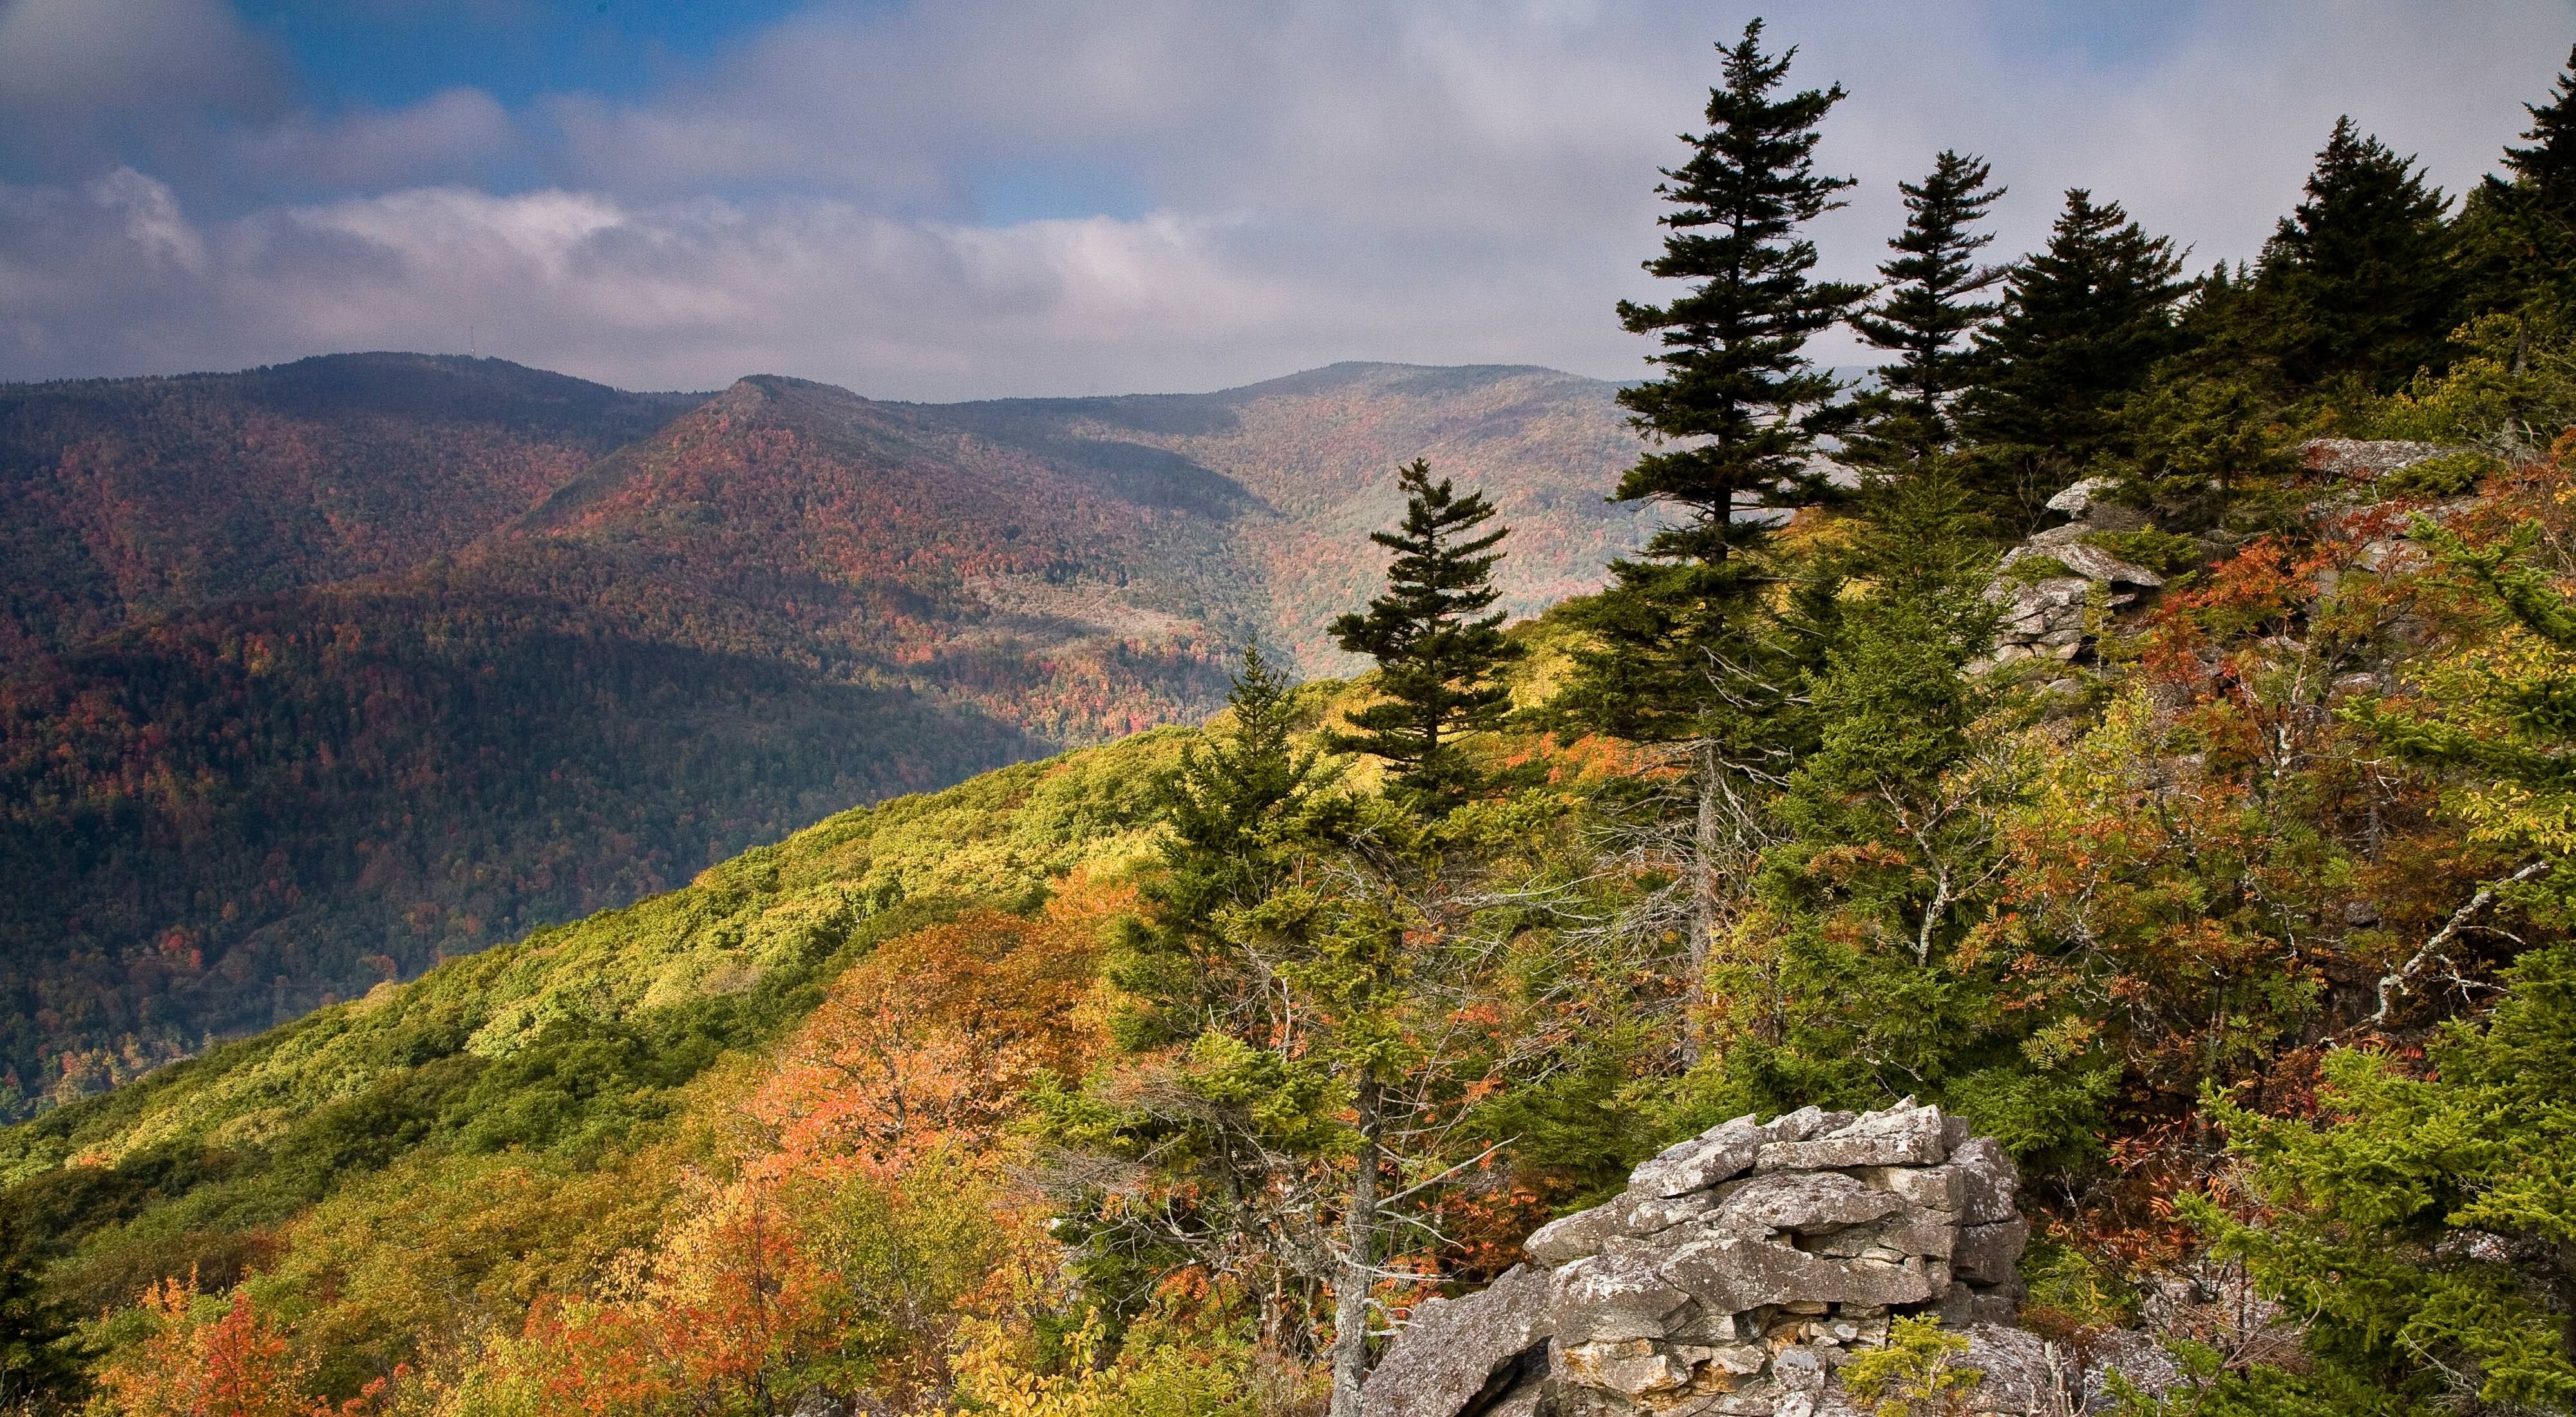 Landscape view of rocky, wooded forests and a mountain range in autumn colors.